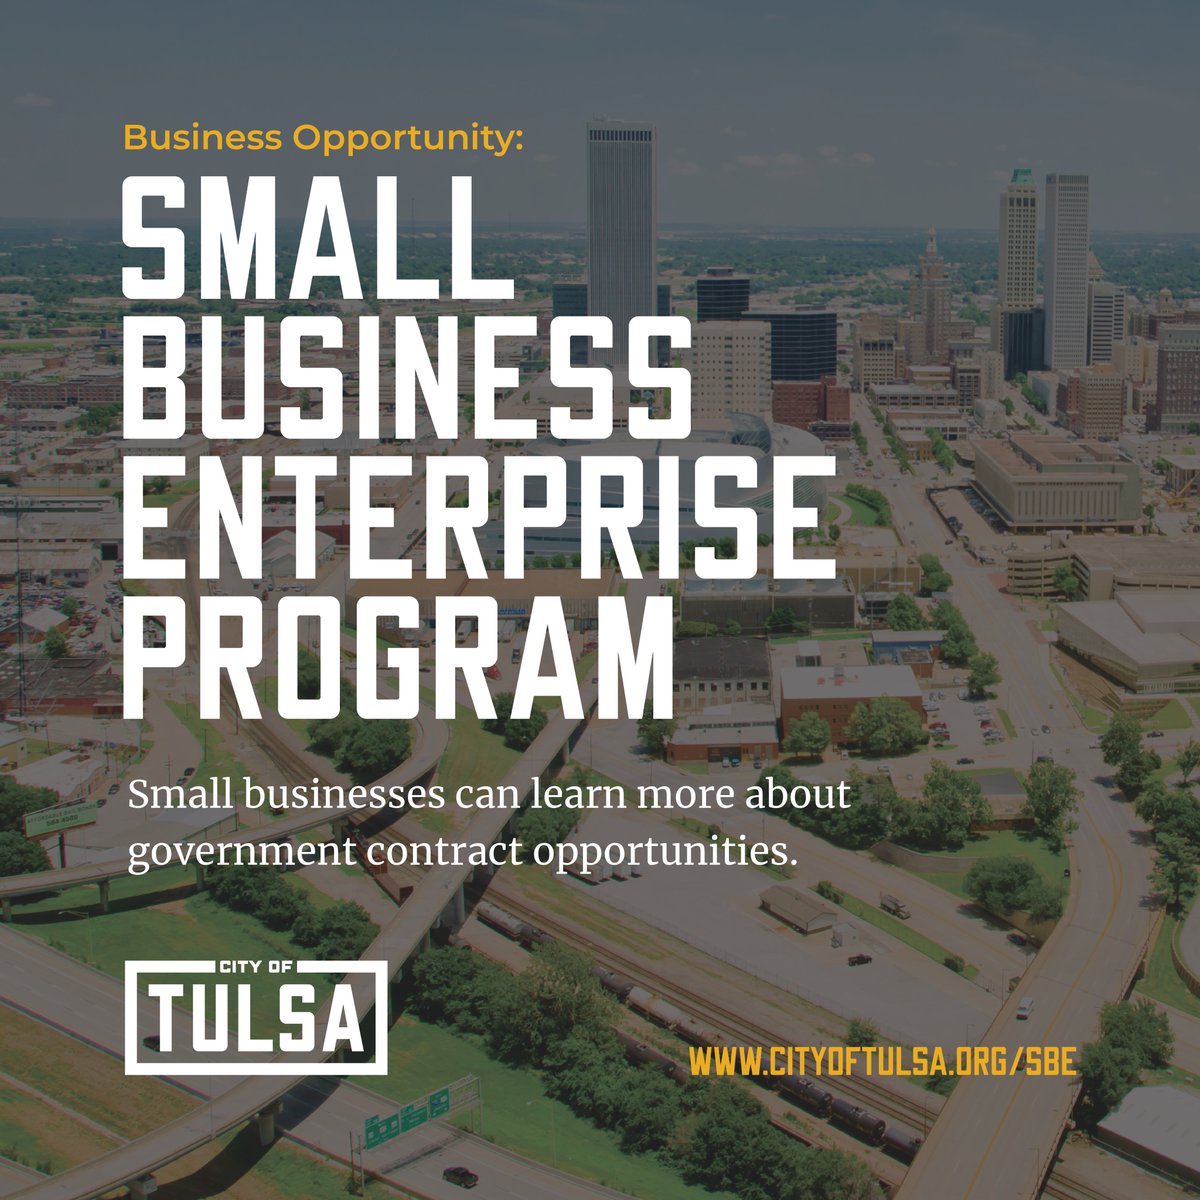 Tulsa-area small businesses, the #SBE program is here to help you access government contracts! Check your eligibility and apply now! cityoftulsa.org/SBE #SBE #TulsaSBE